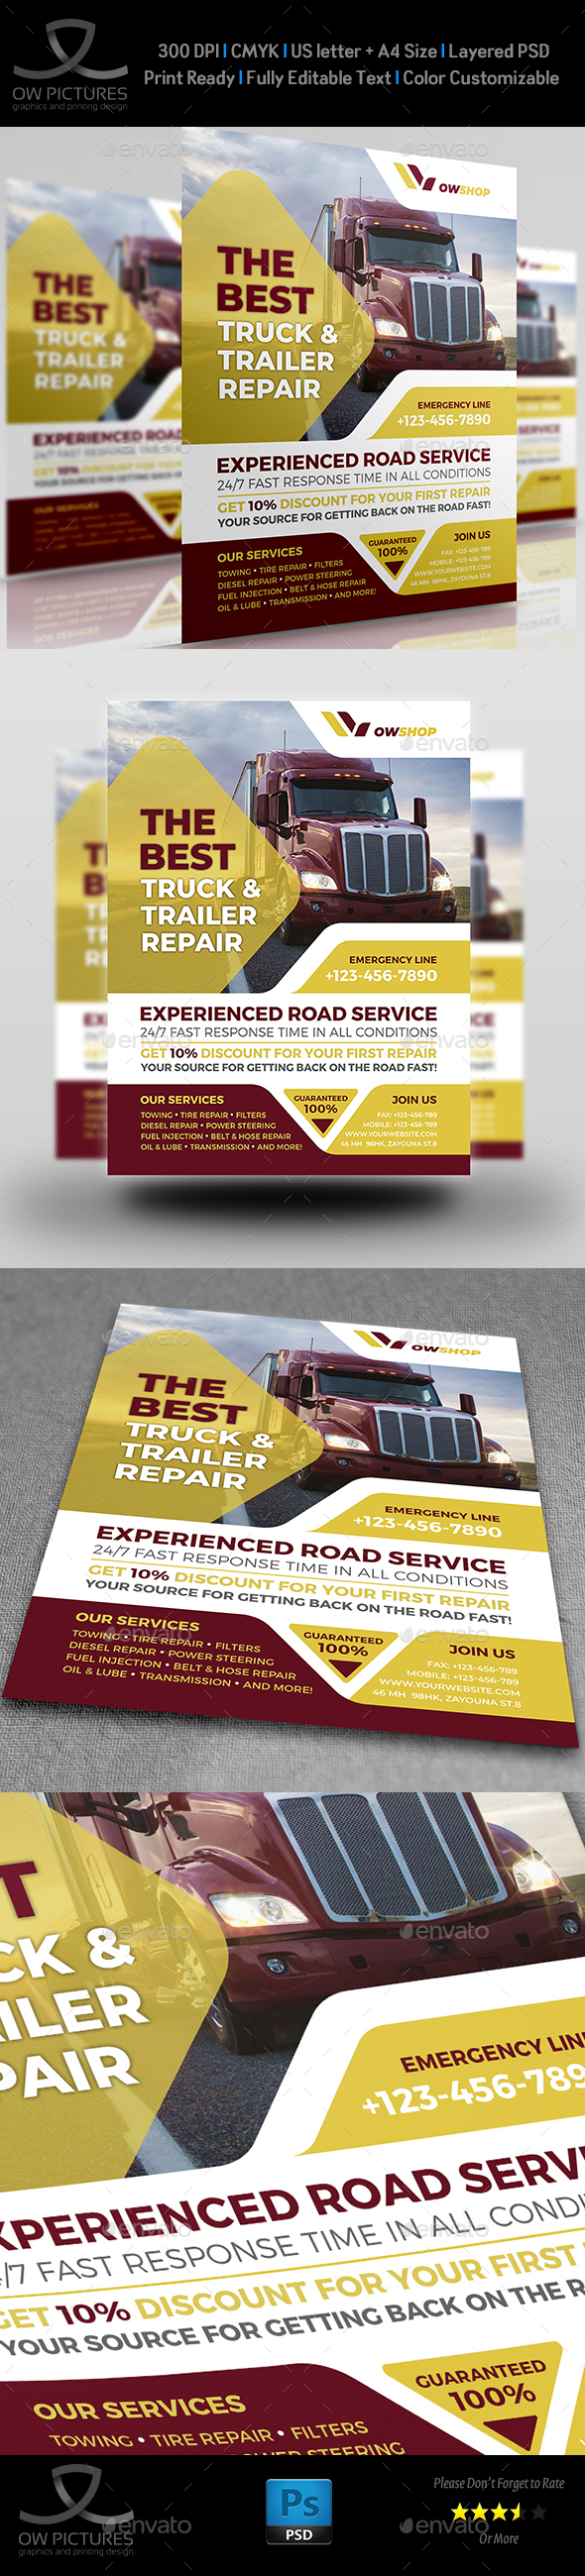 Truck and Trailer Repair Services Flyer Template